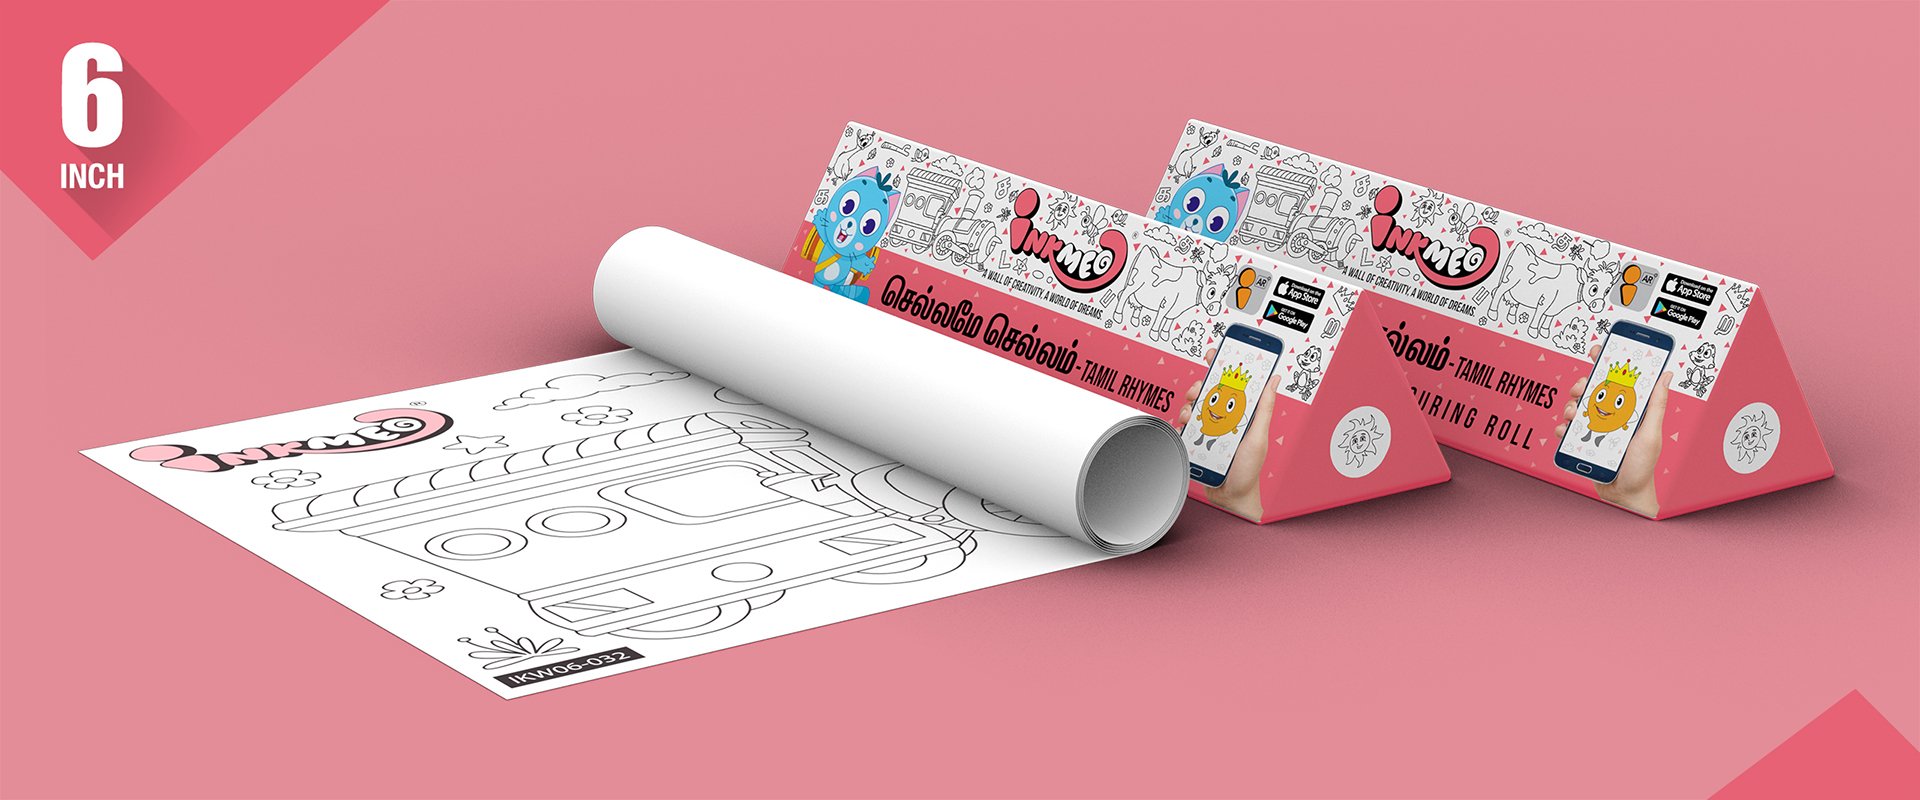 Tamil Rhymes Colouring Roll (6 inch) - Inkmeo